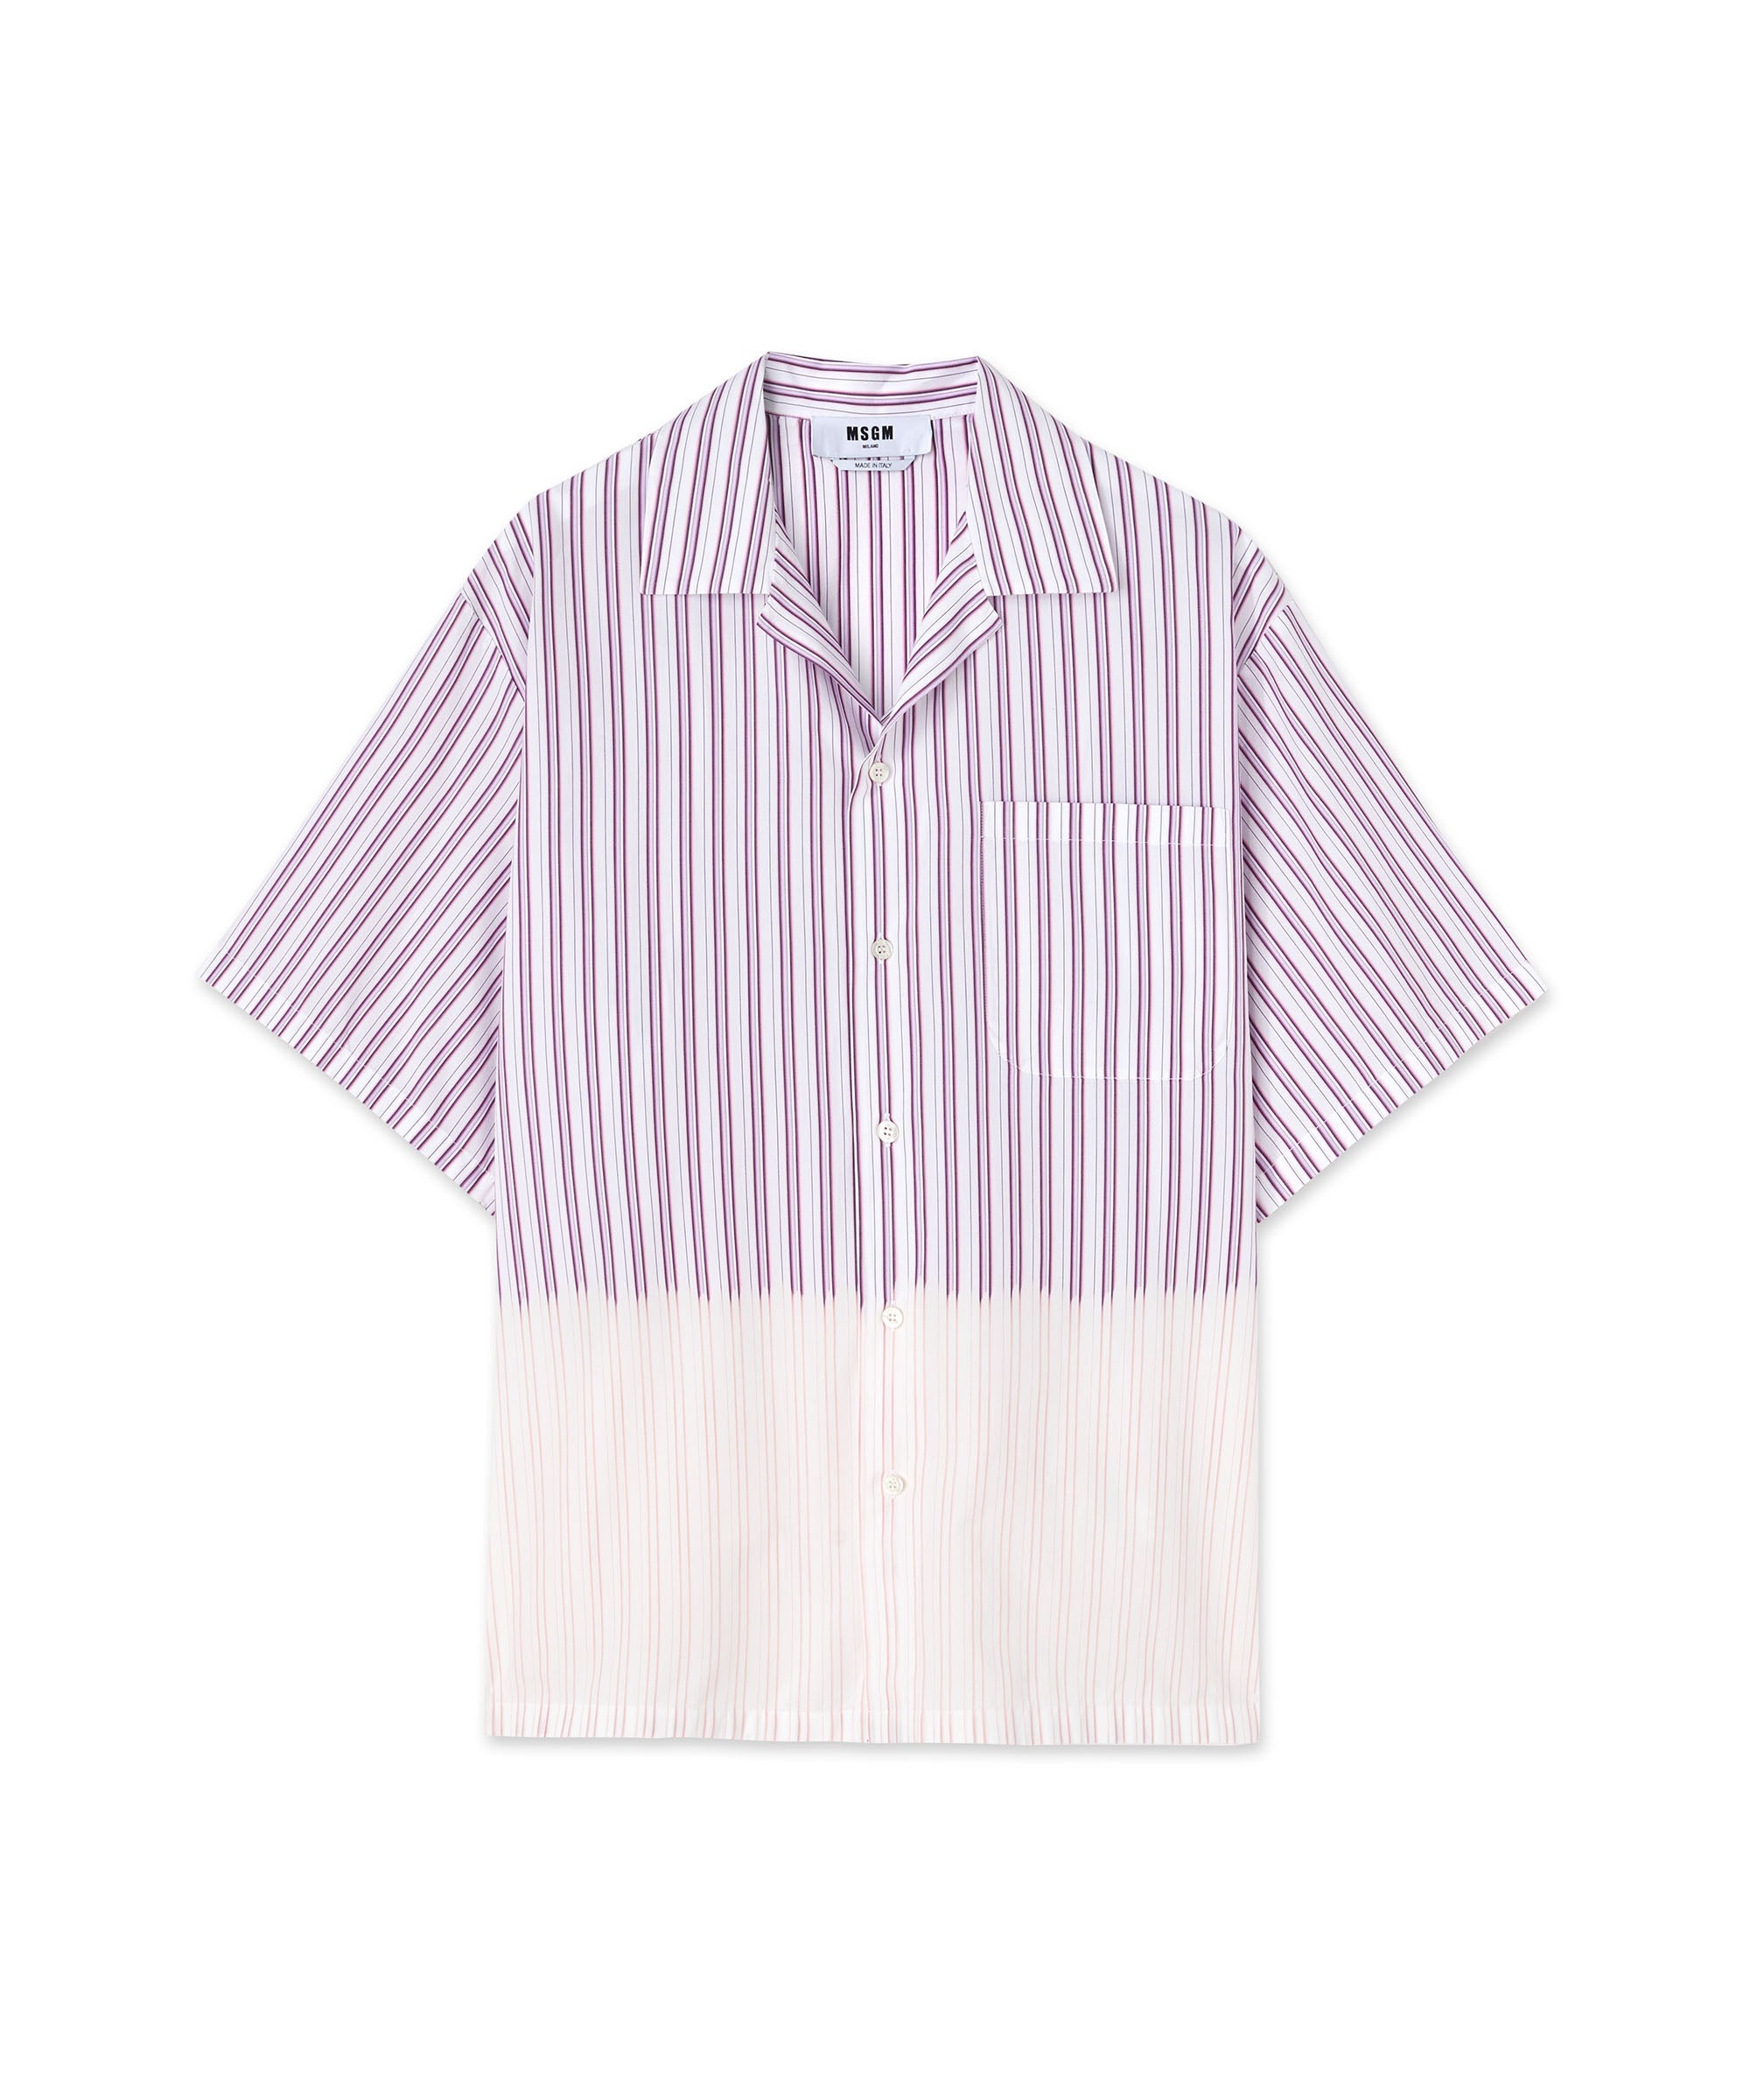 Poplin bowling shirt with faded treatment - 1